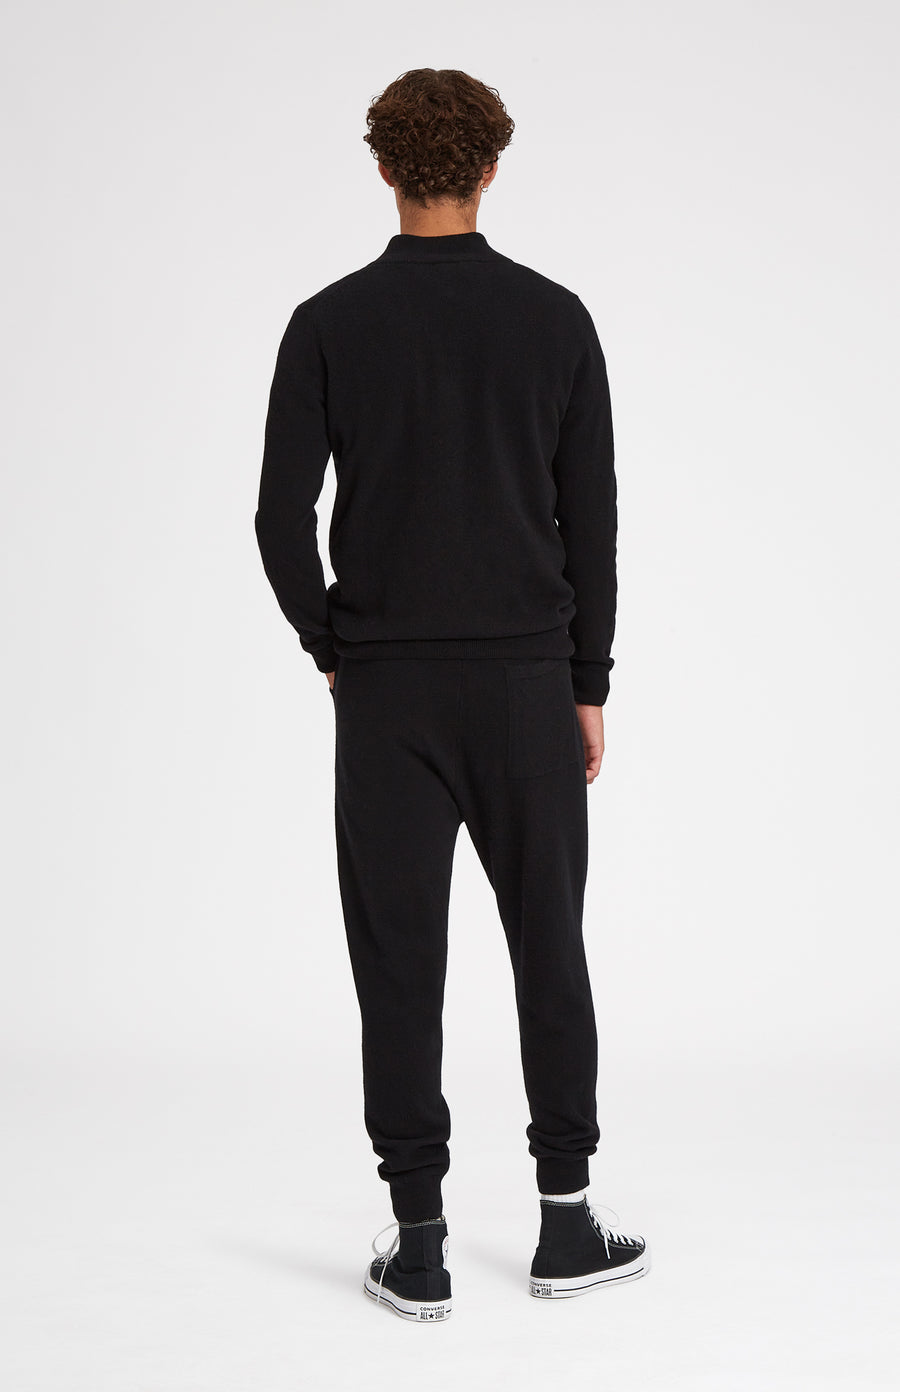 Men's Knitted Merino Cashmere Joggers in Black rear view full length - Pringle of Scotland